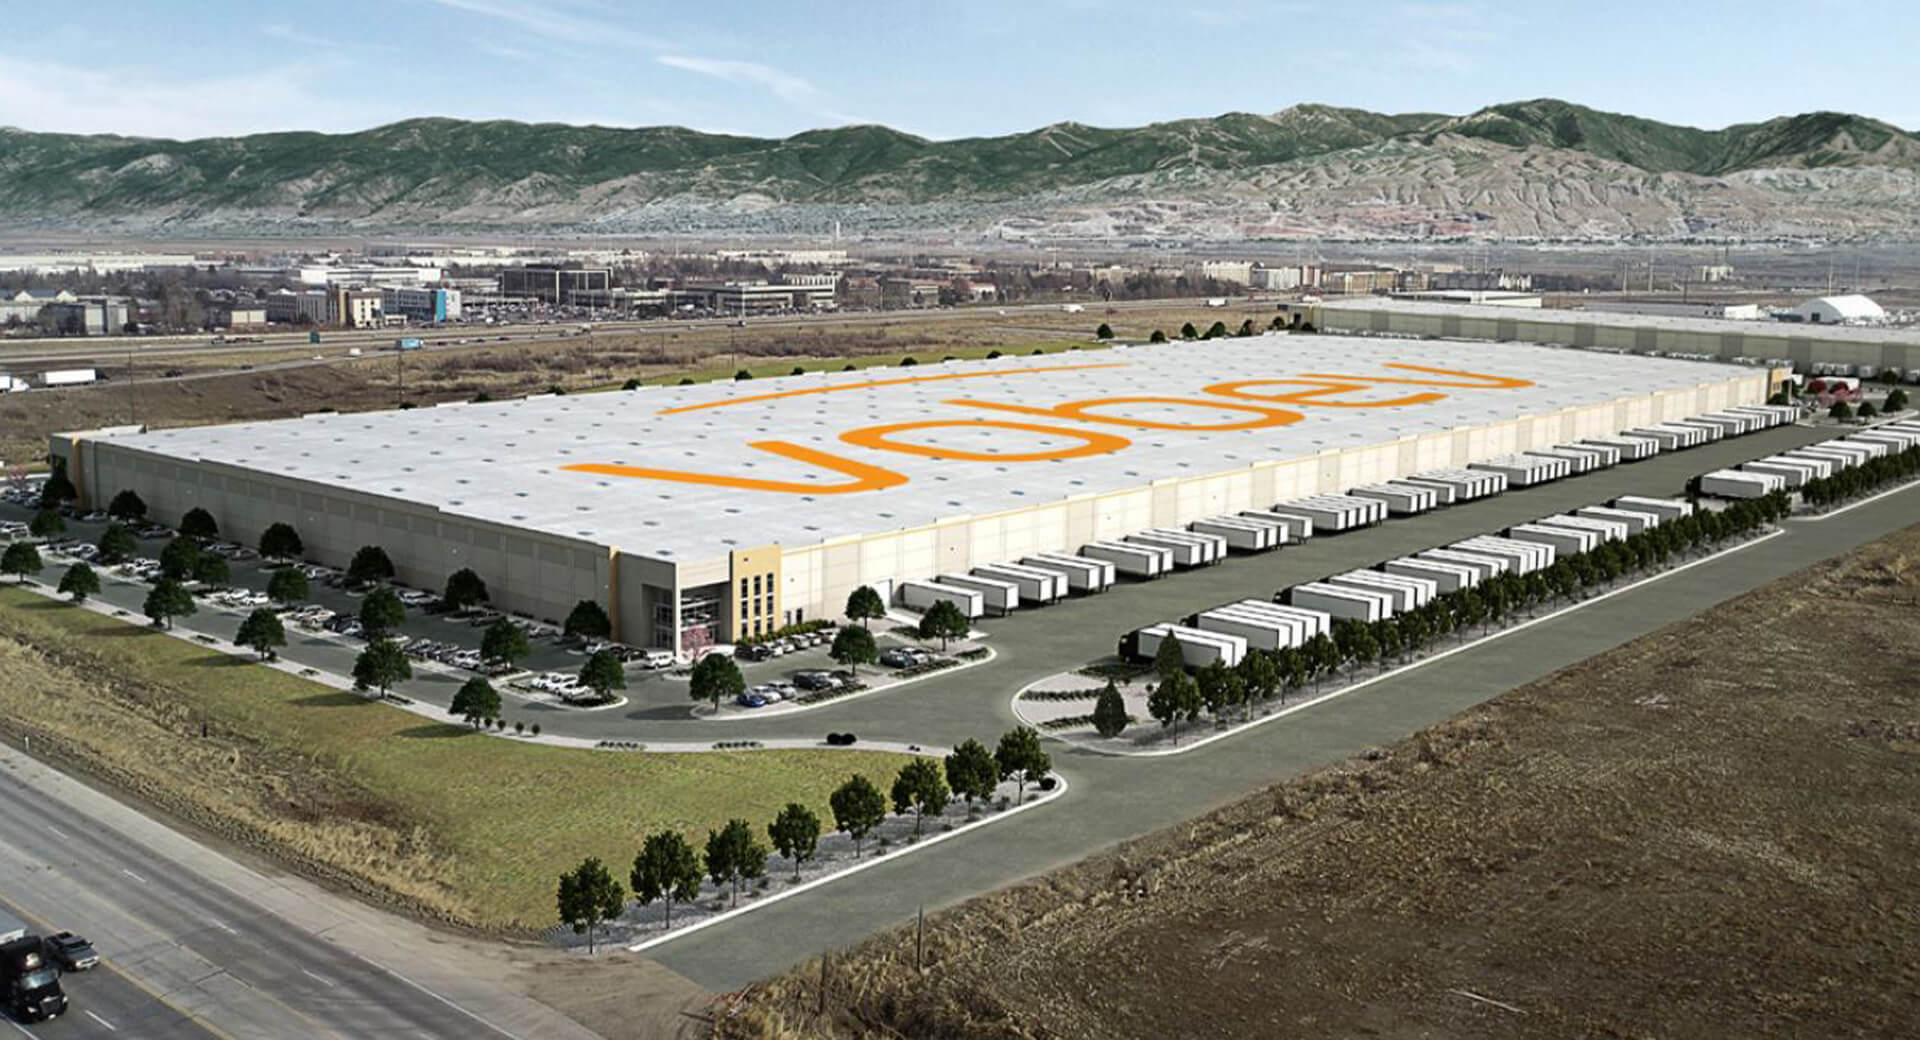 An aerial view of the Vobev facility.  Large building with the word "Vobev" printed in orange on the roof.